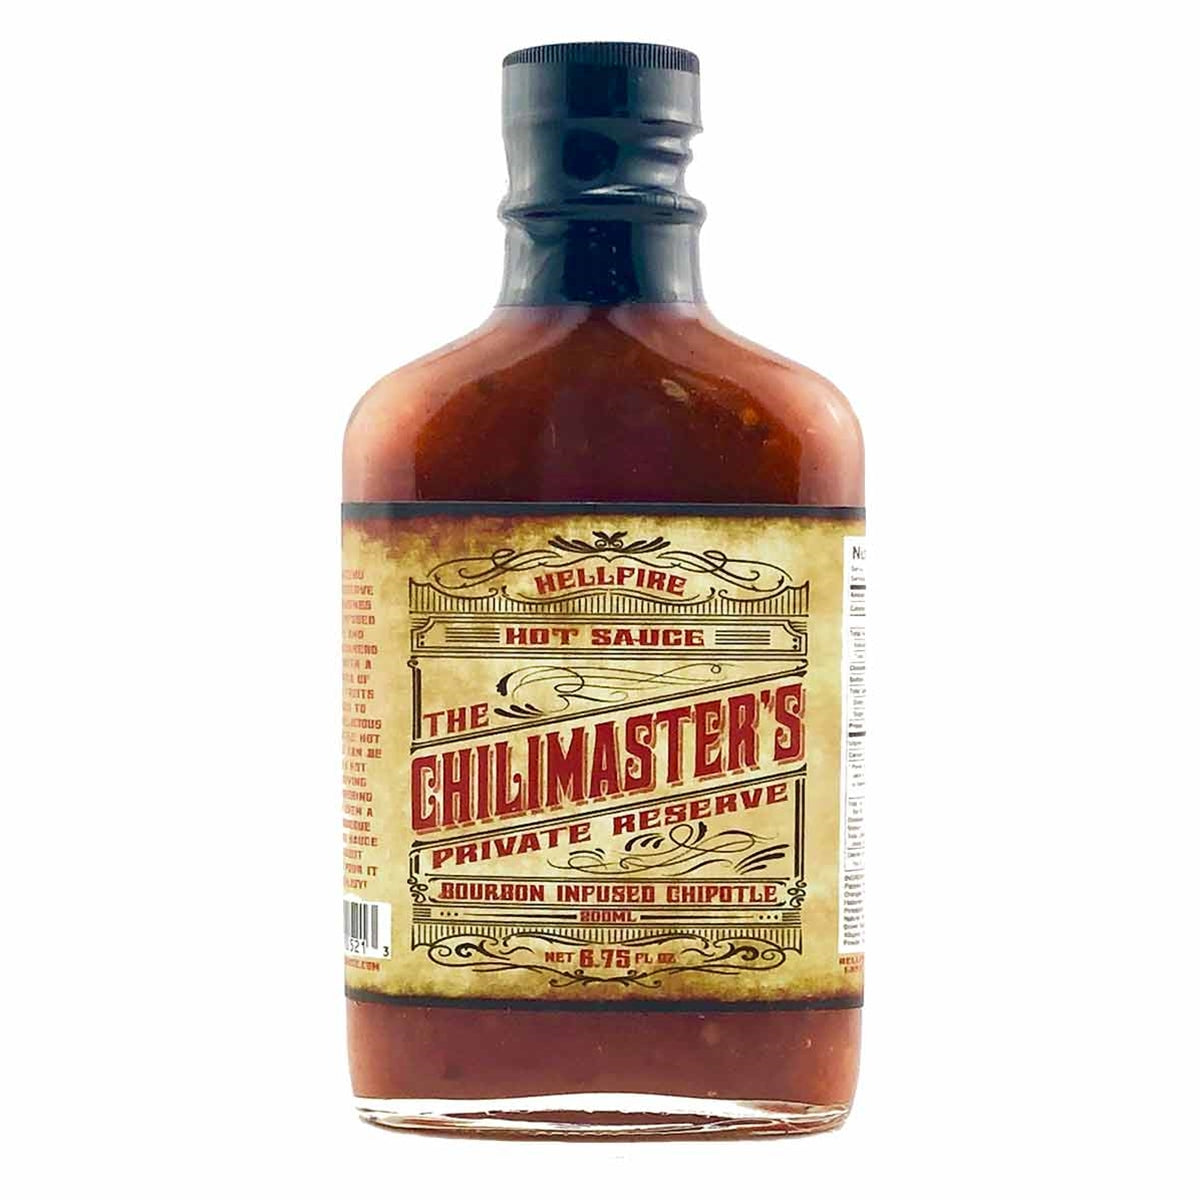 Hot Sauce HellFire The Chili Masters Bourbon Infused Chipotle 6.75 oz Flask Heat 4